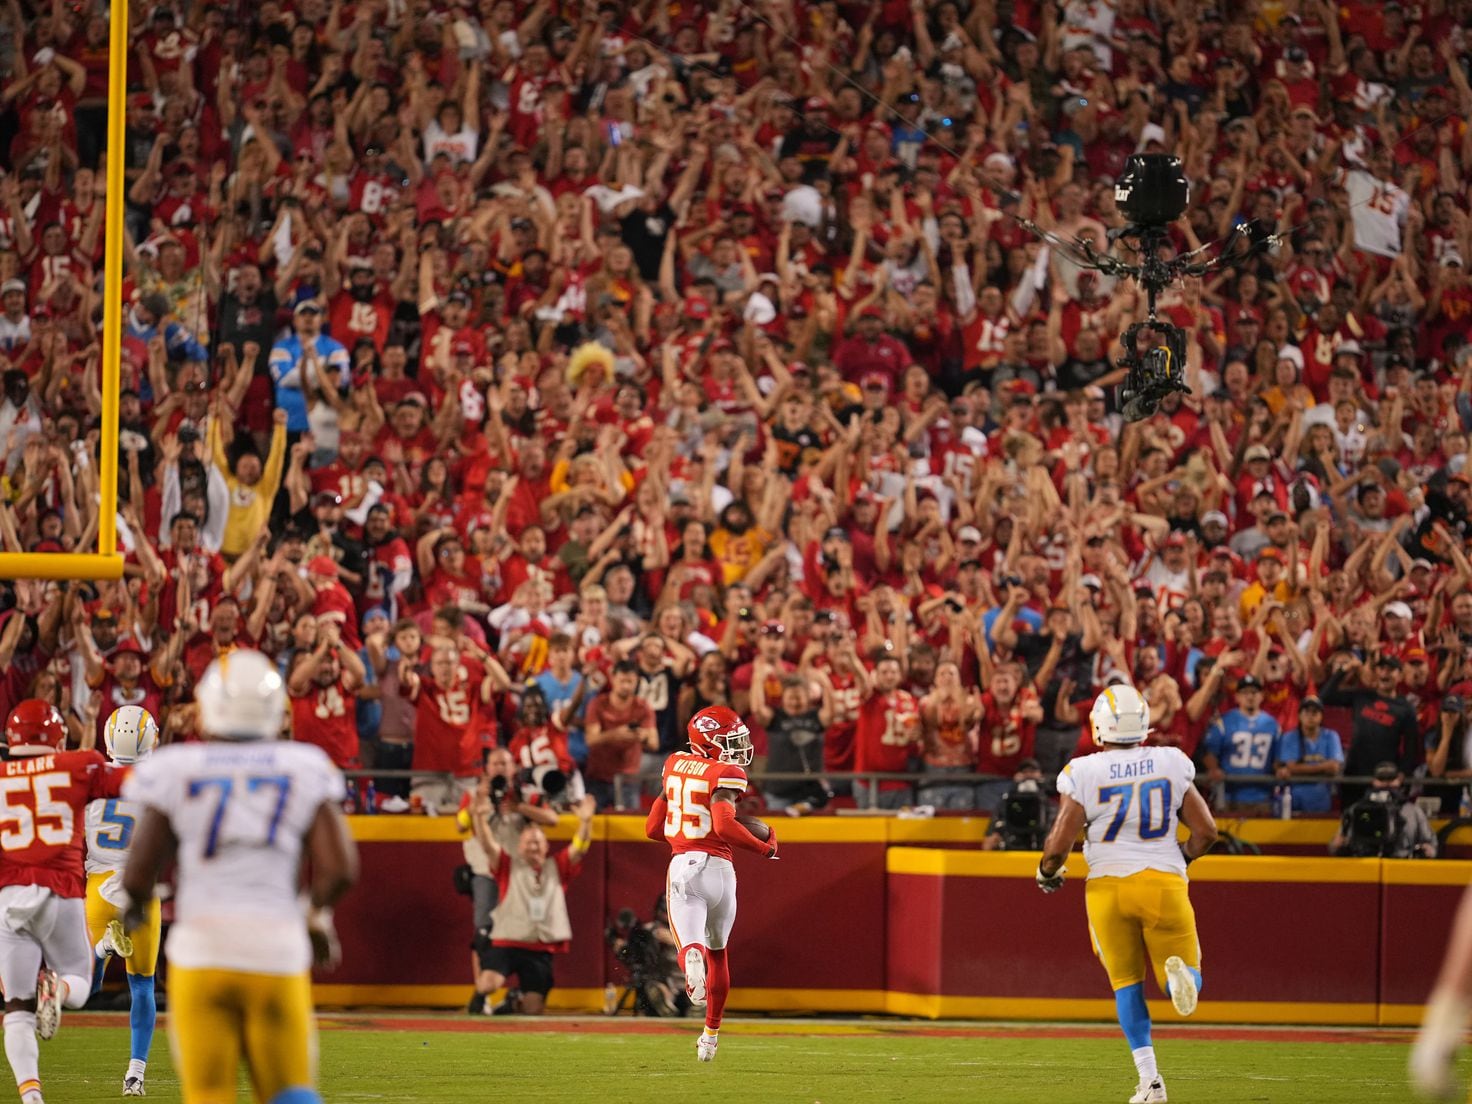 Chiefs-Chargers Thursday night football: 5 questions with the